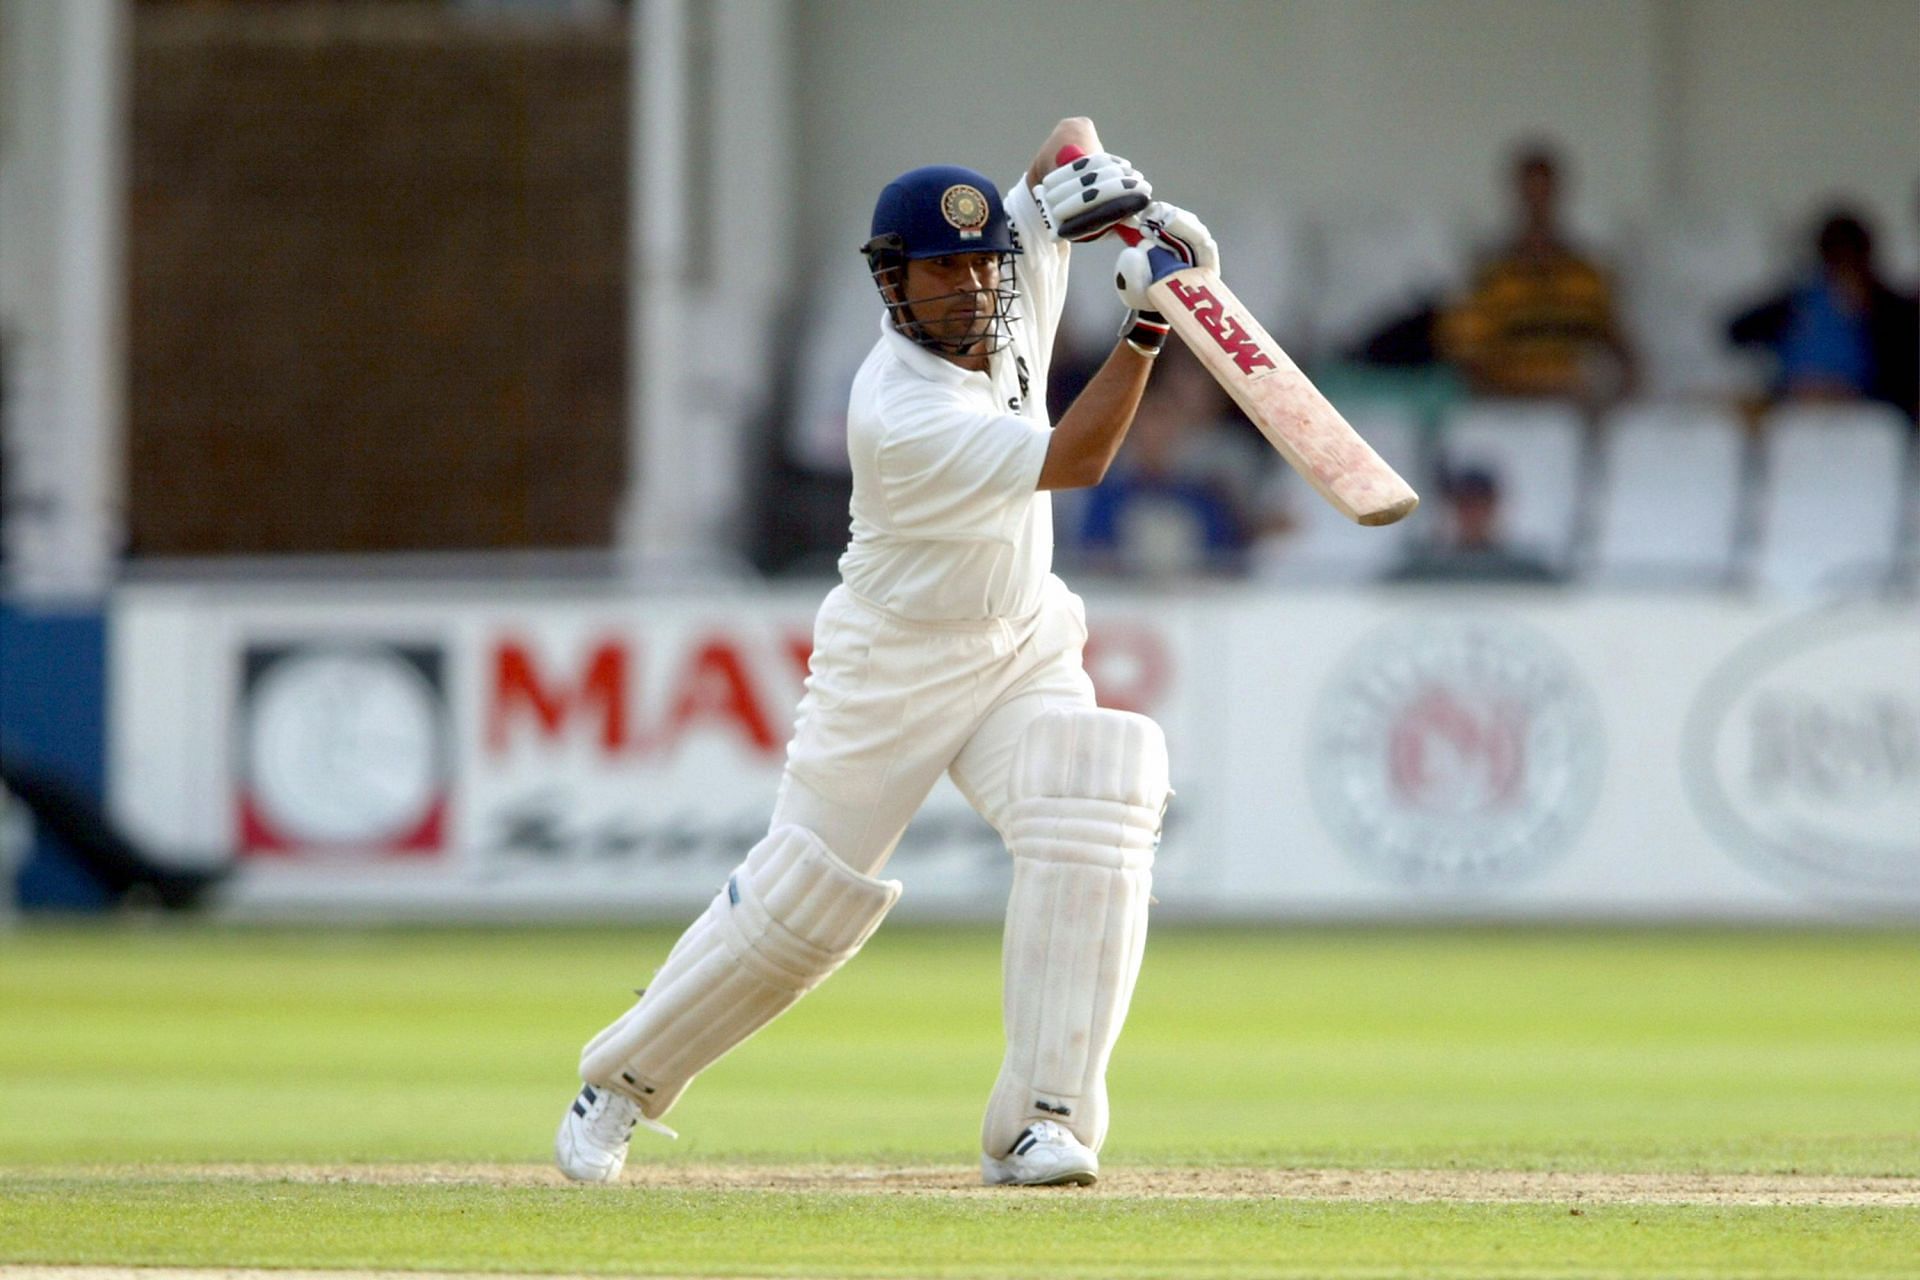 Players like Sachin Tendulkar come once in several generations and Joe Root will have to bear that in mind.